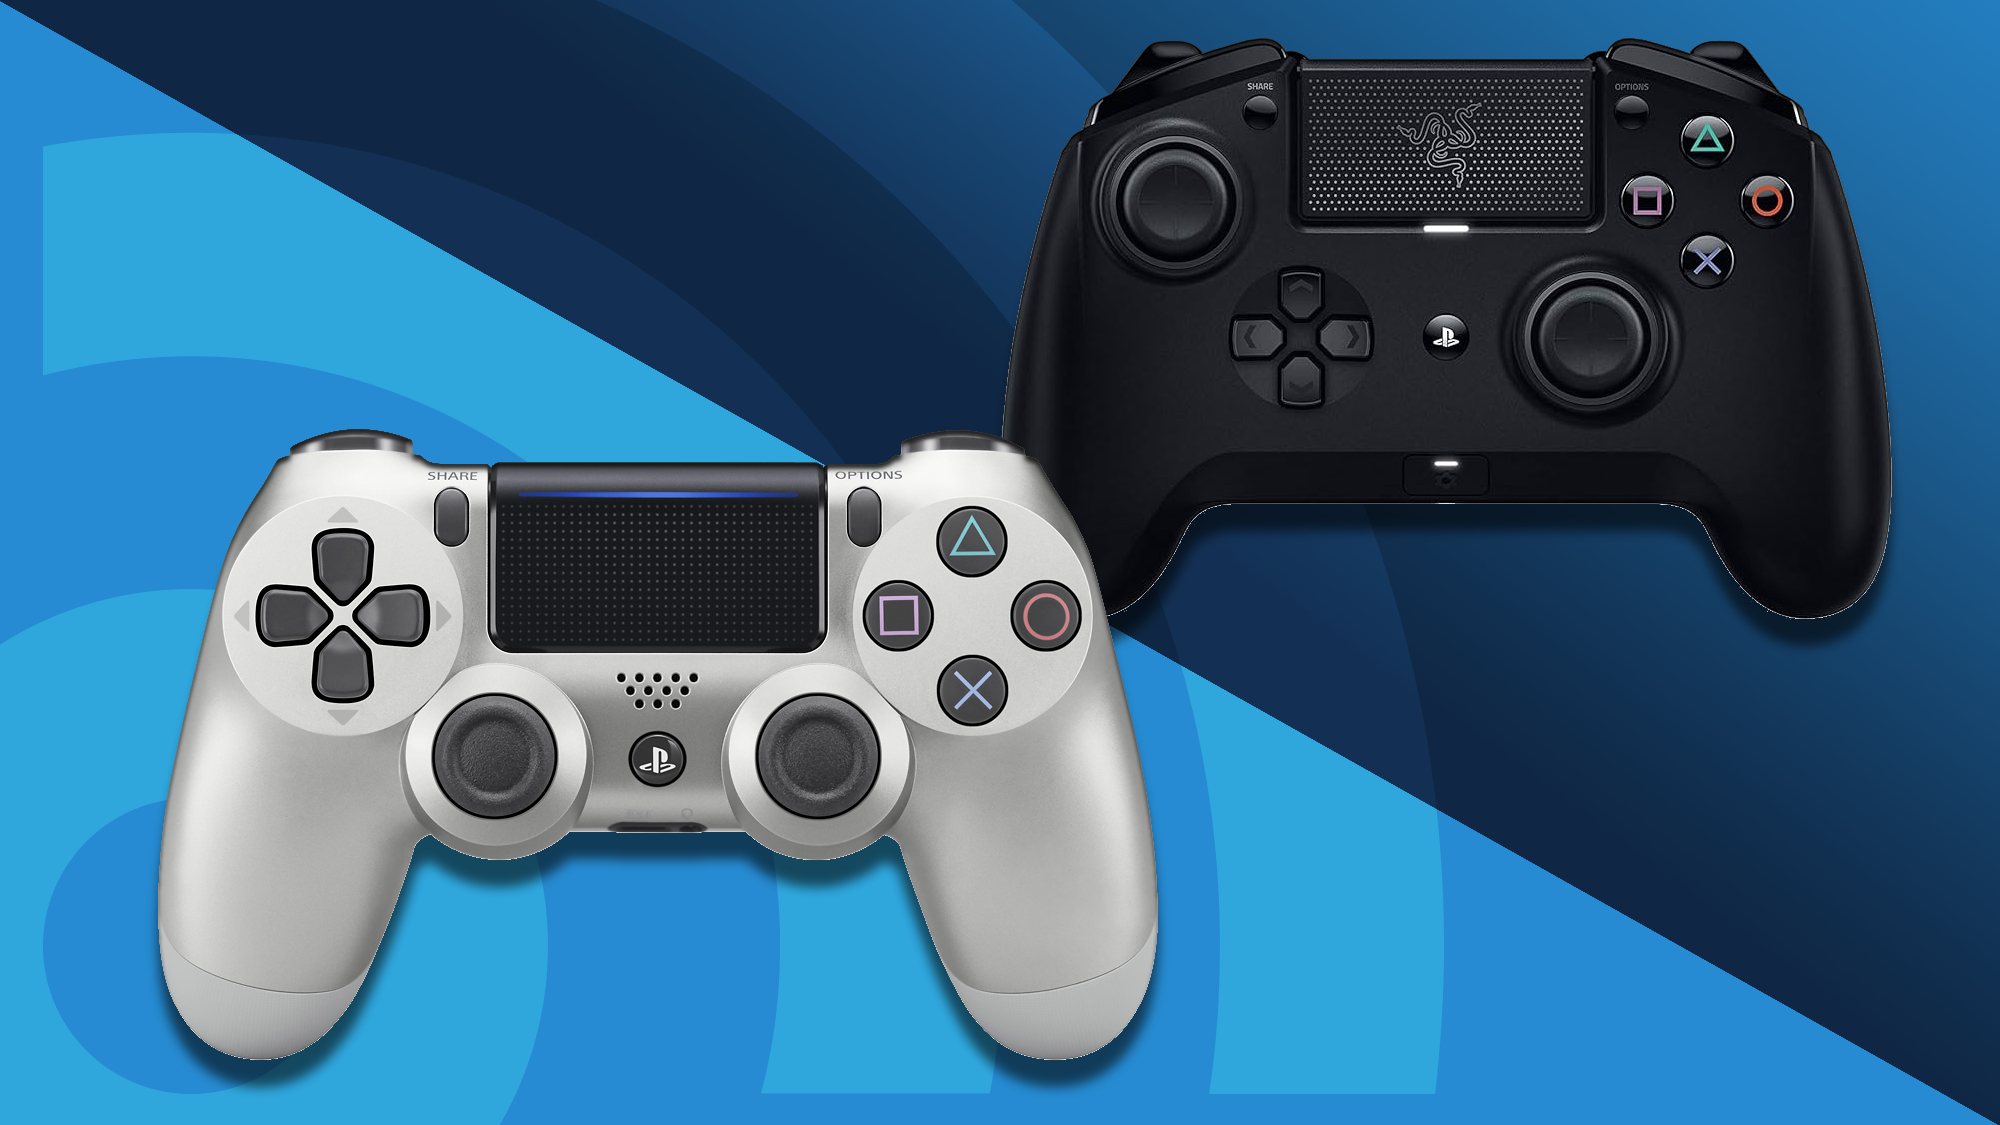 How to Connect a PS4 DualShock 4 Controller to a PC